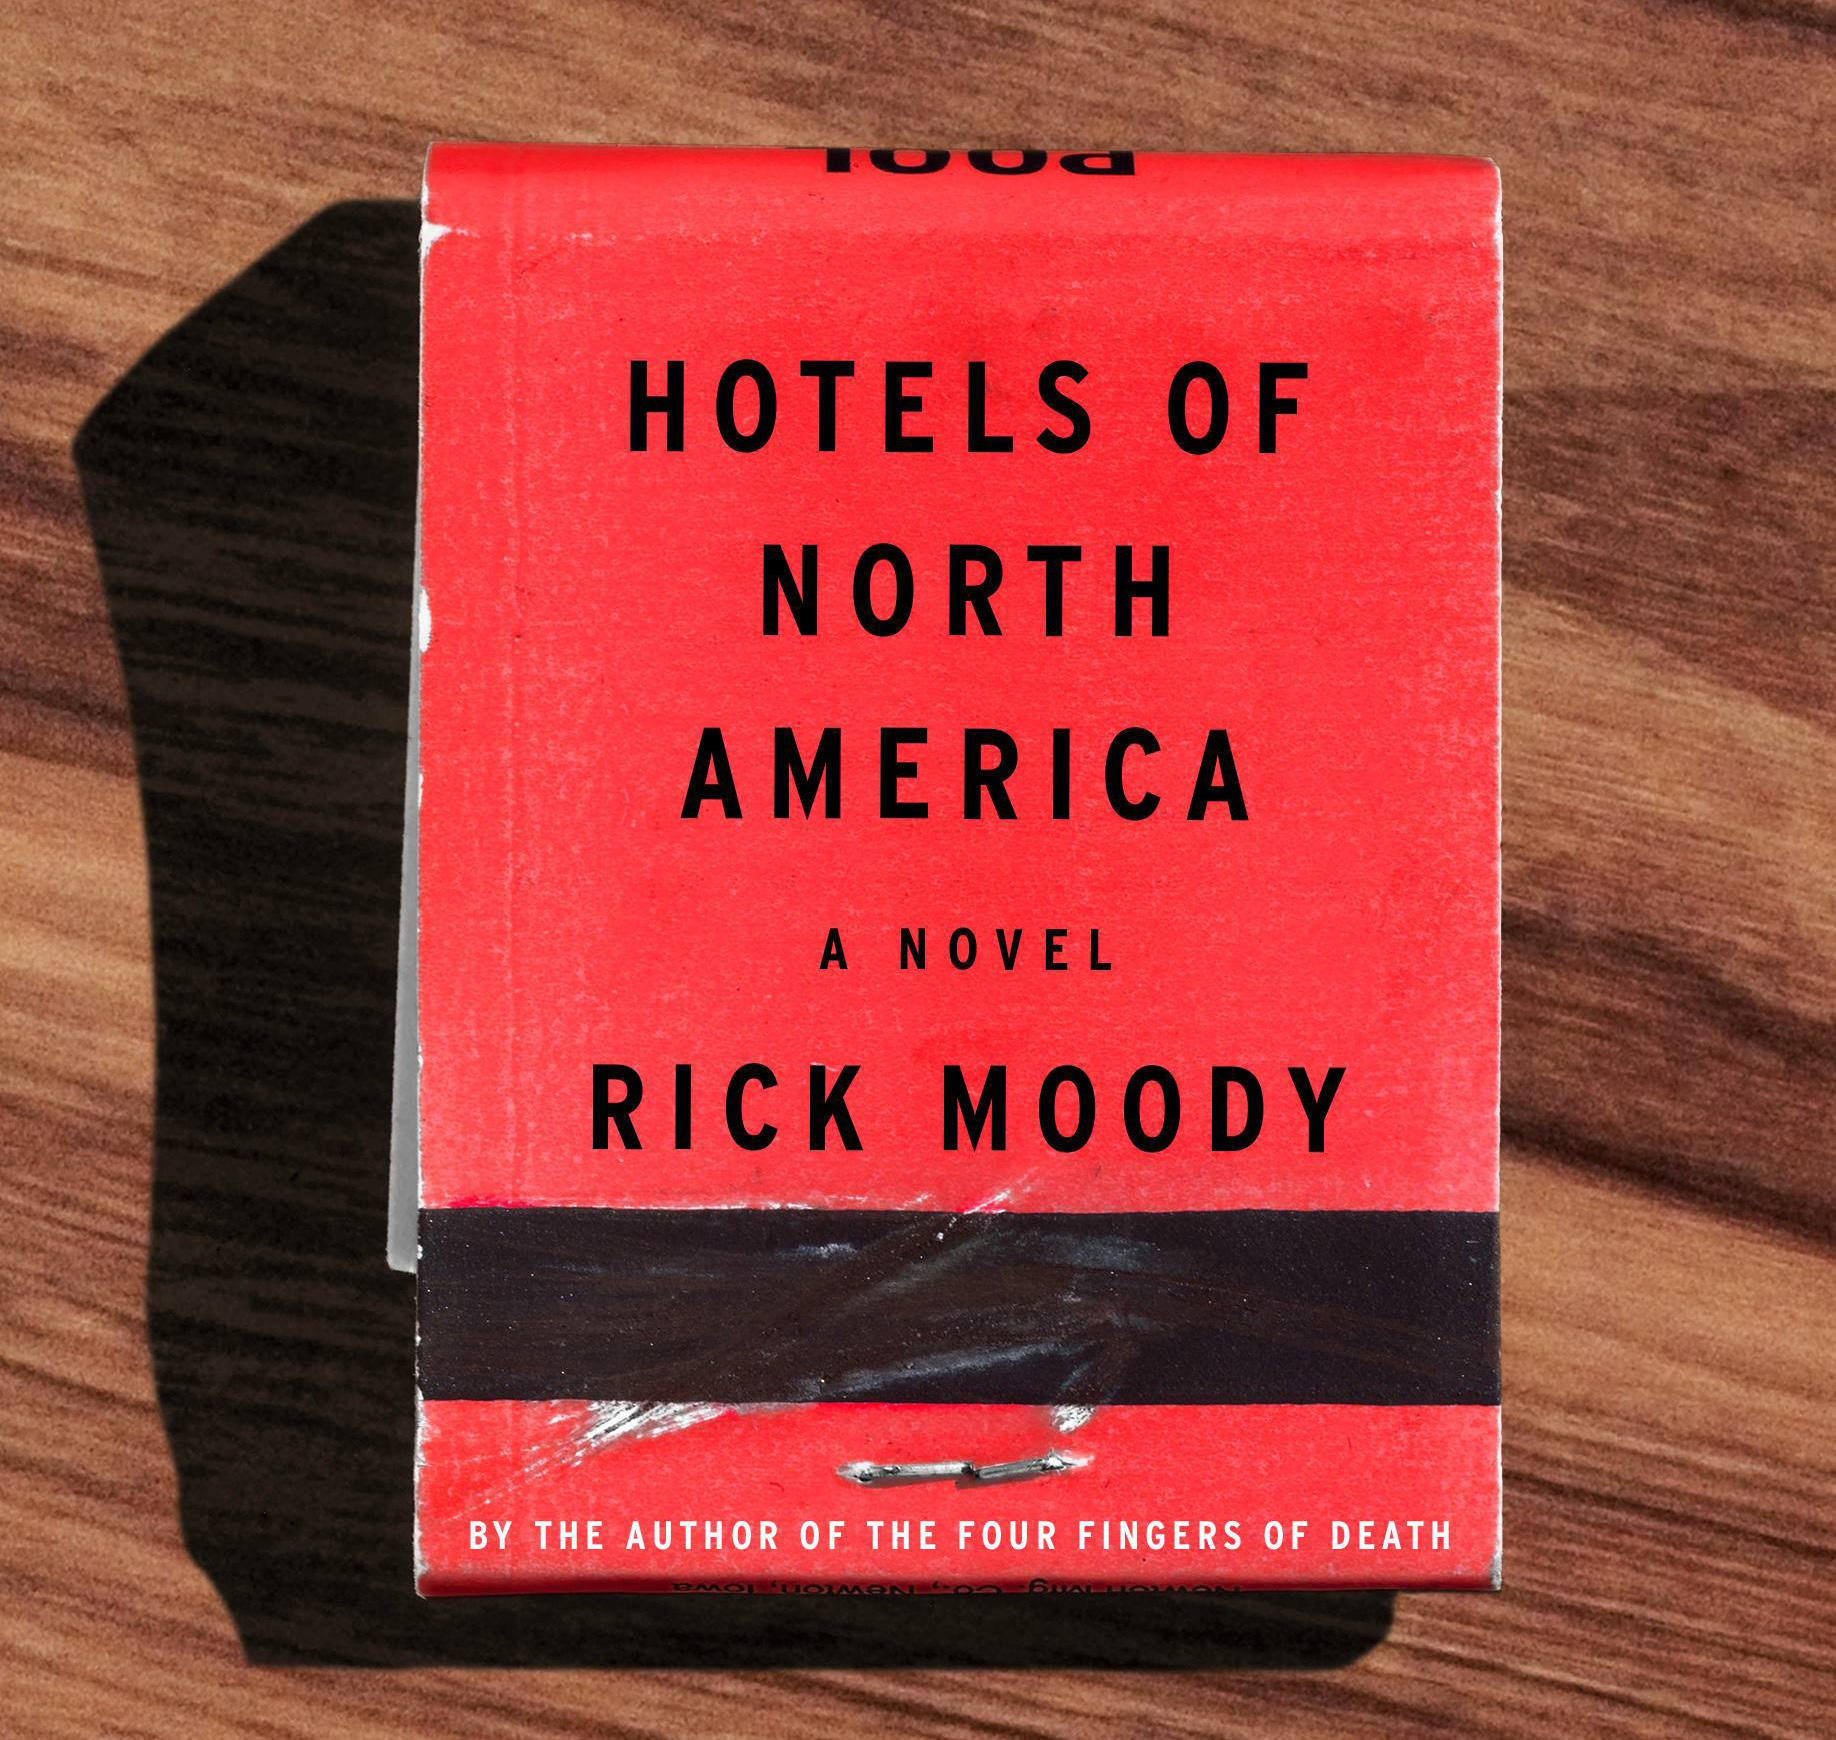 "Hotels of North America" cover